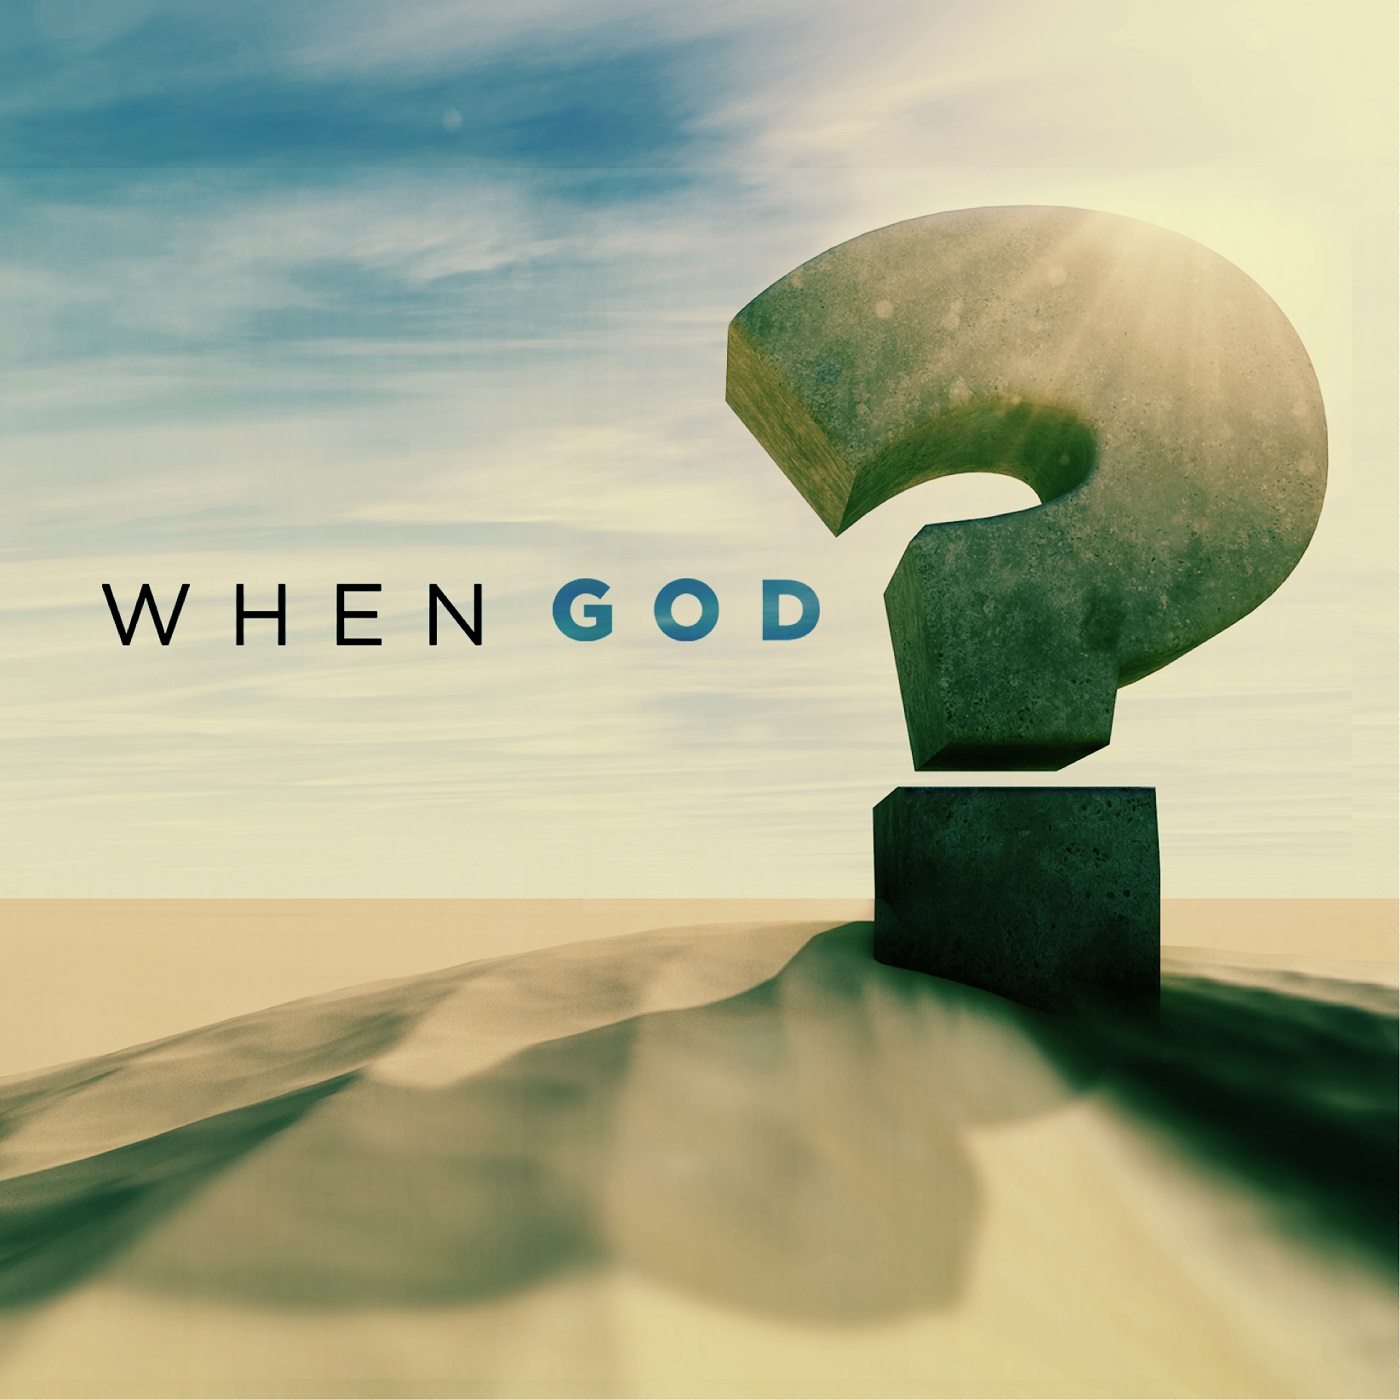 When God?: When God Is Inattentive